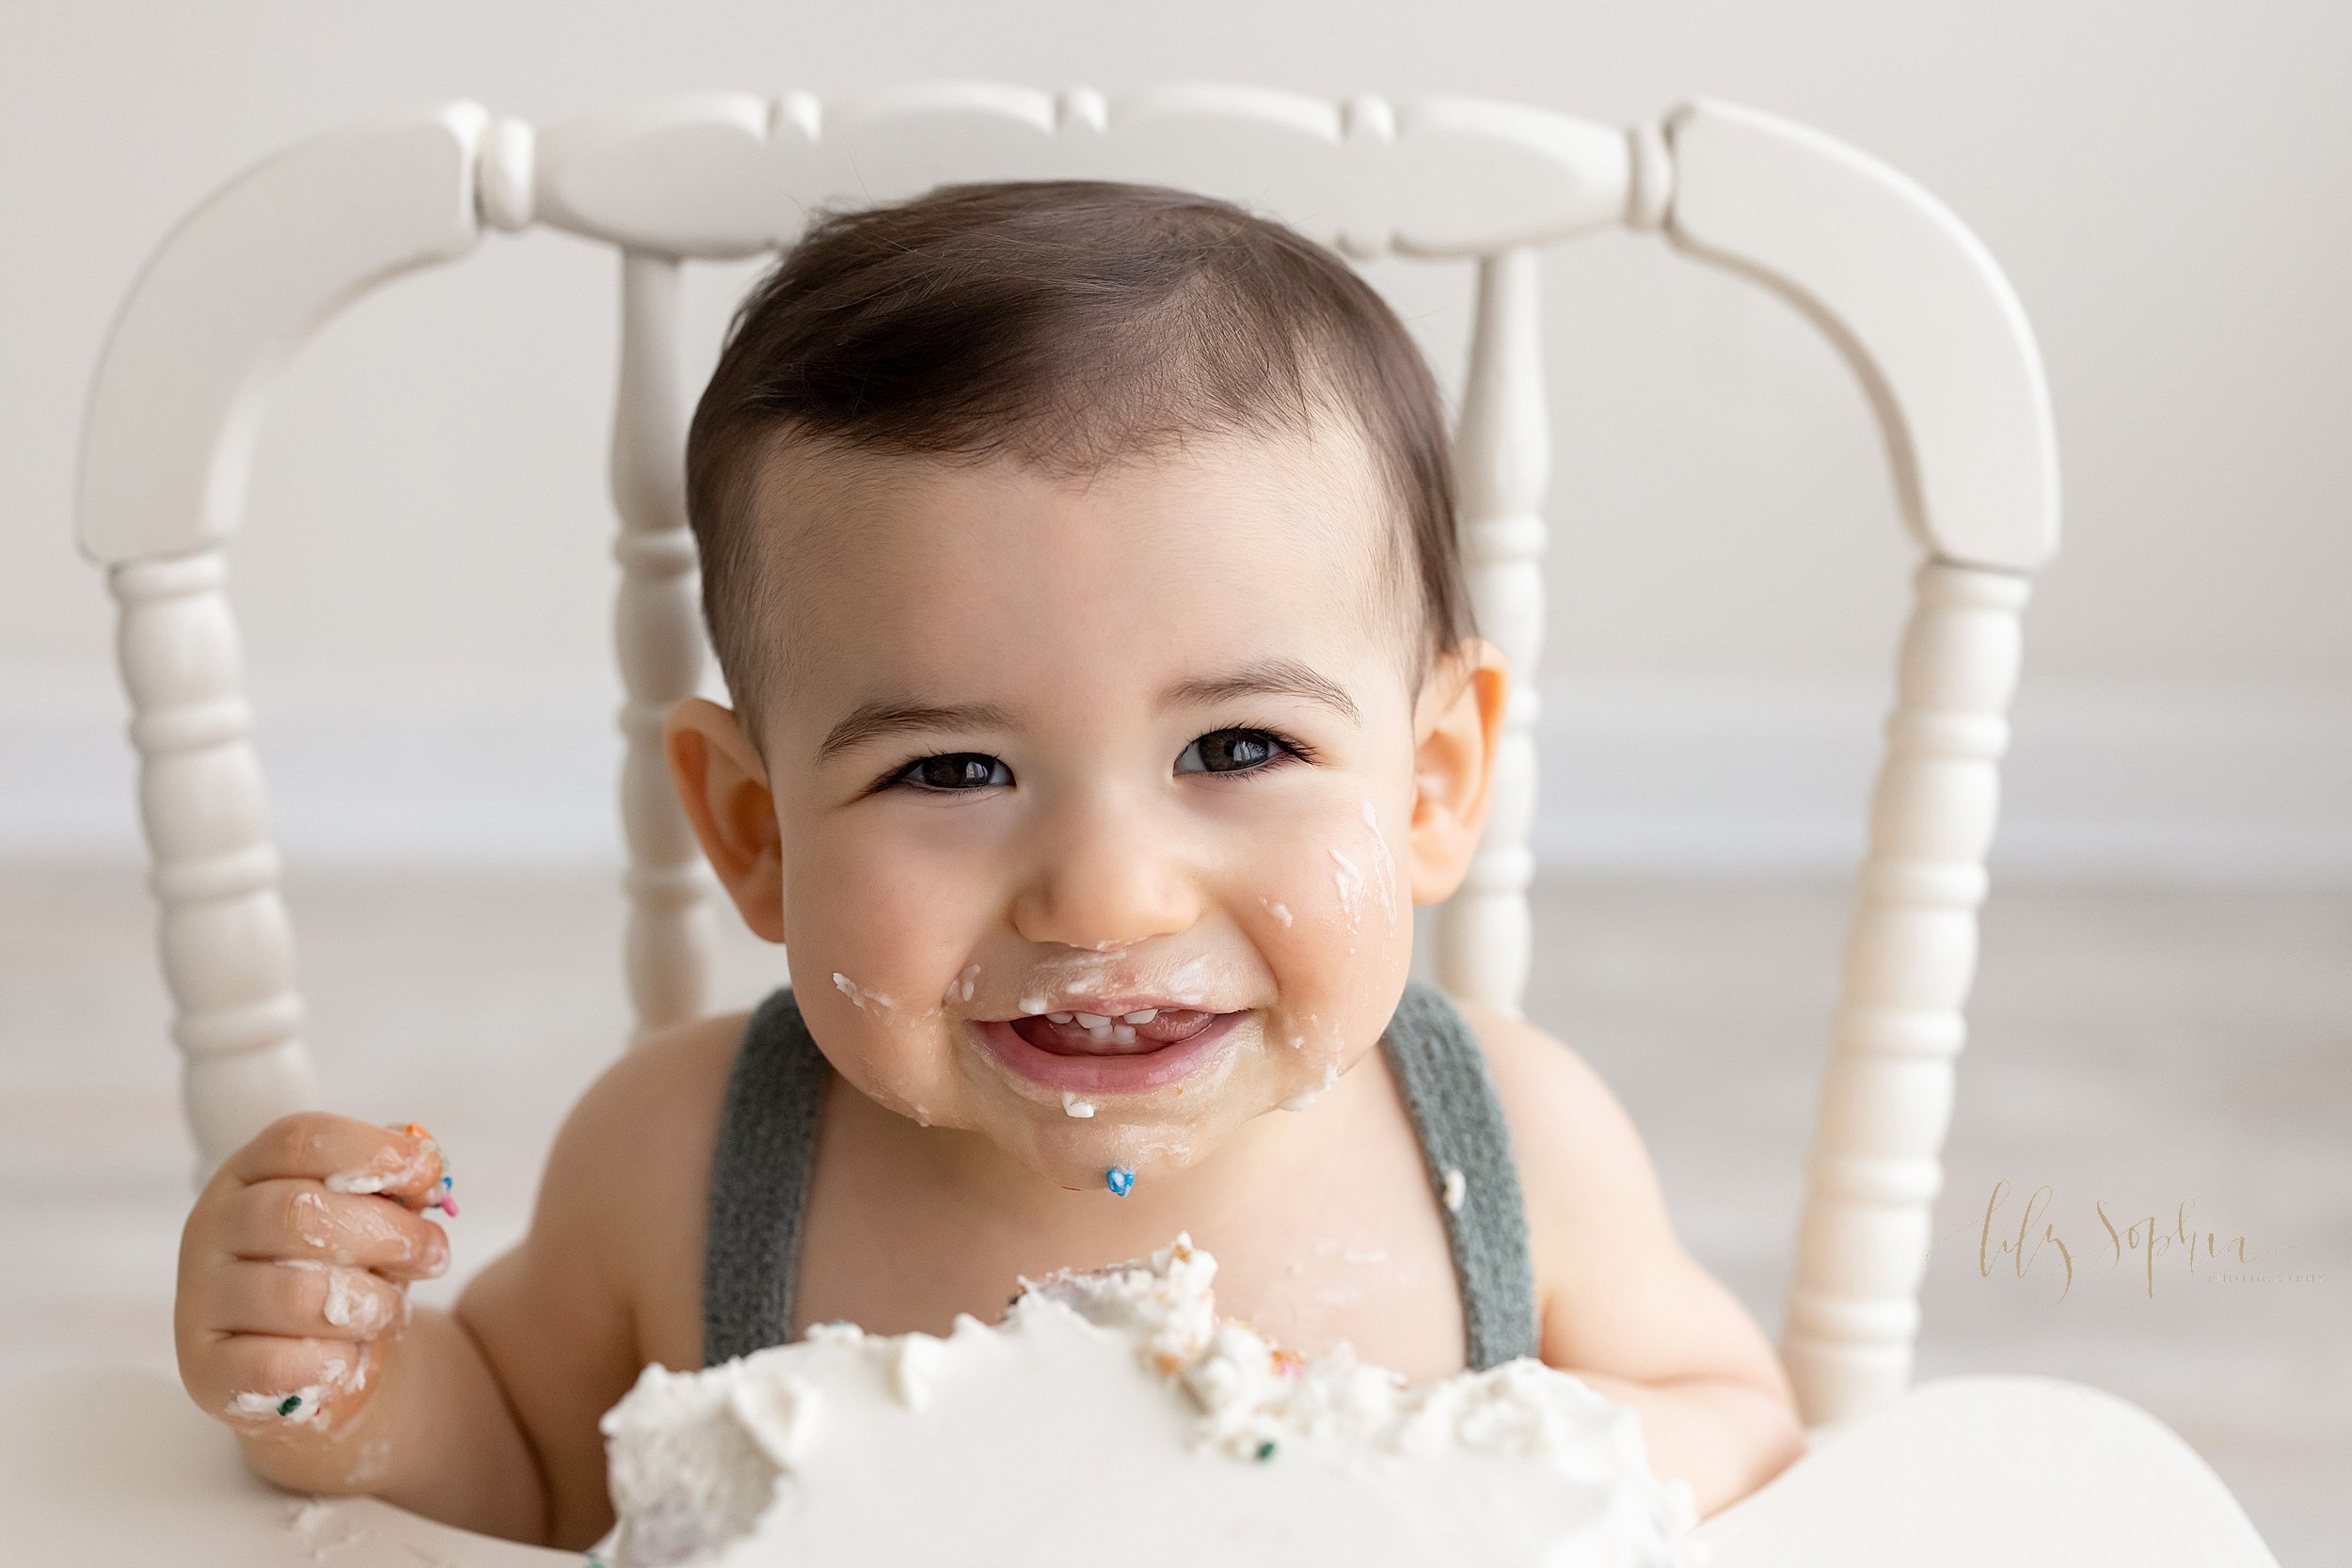  First birthday photo shoot with a one year old baby boy as he sits in an antique high chair smiling to show his teeth with icing from his smash cake on his face and his hand taken in a natural light studio near Ansley Park near Atlanta, Georgia. 